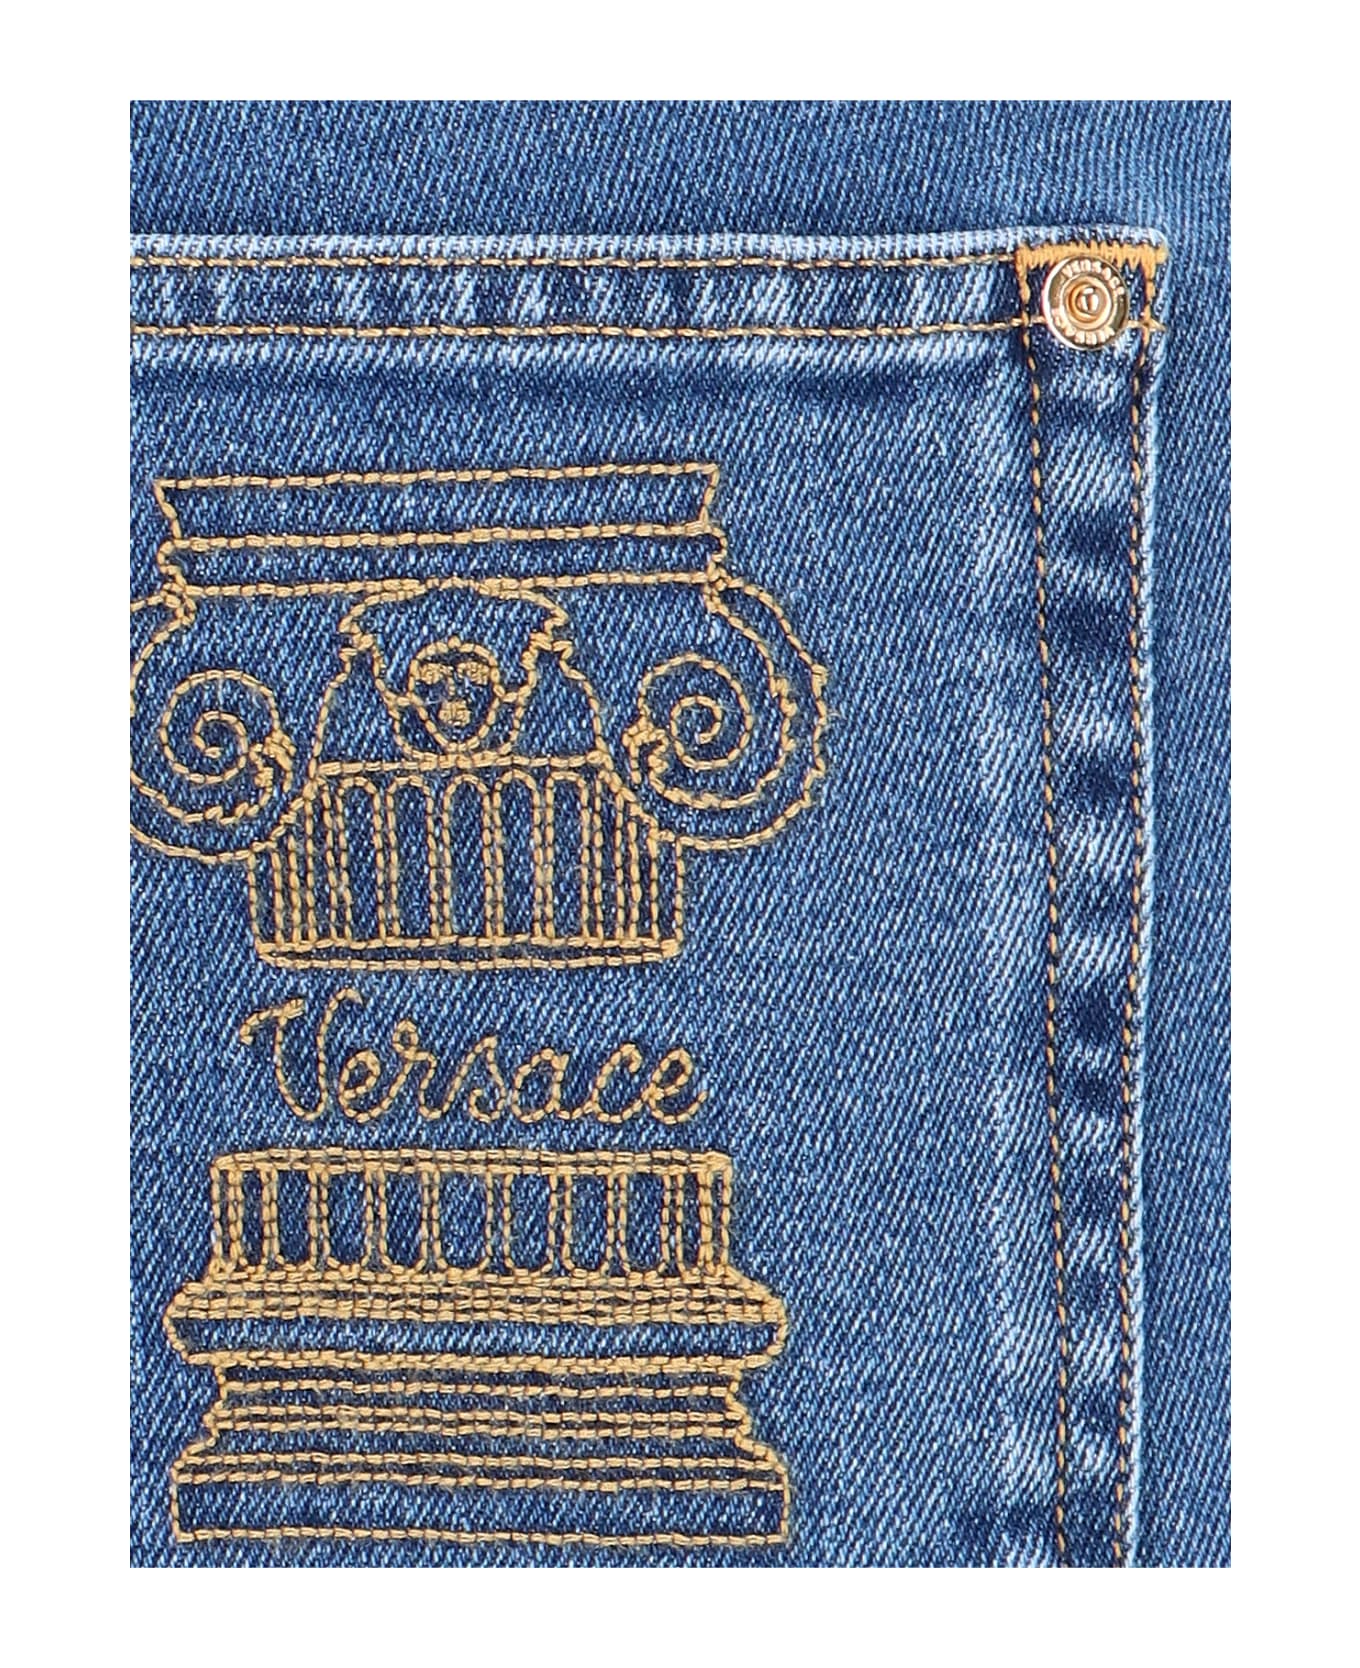 Versace Blue Fitted Jeans With Logo Embroidered And Botton In Cotton Blend Denim Woman - Blue